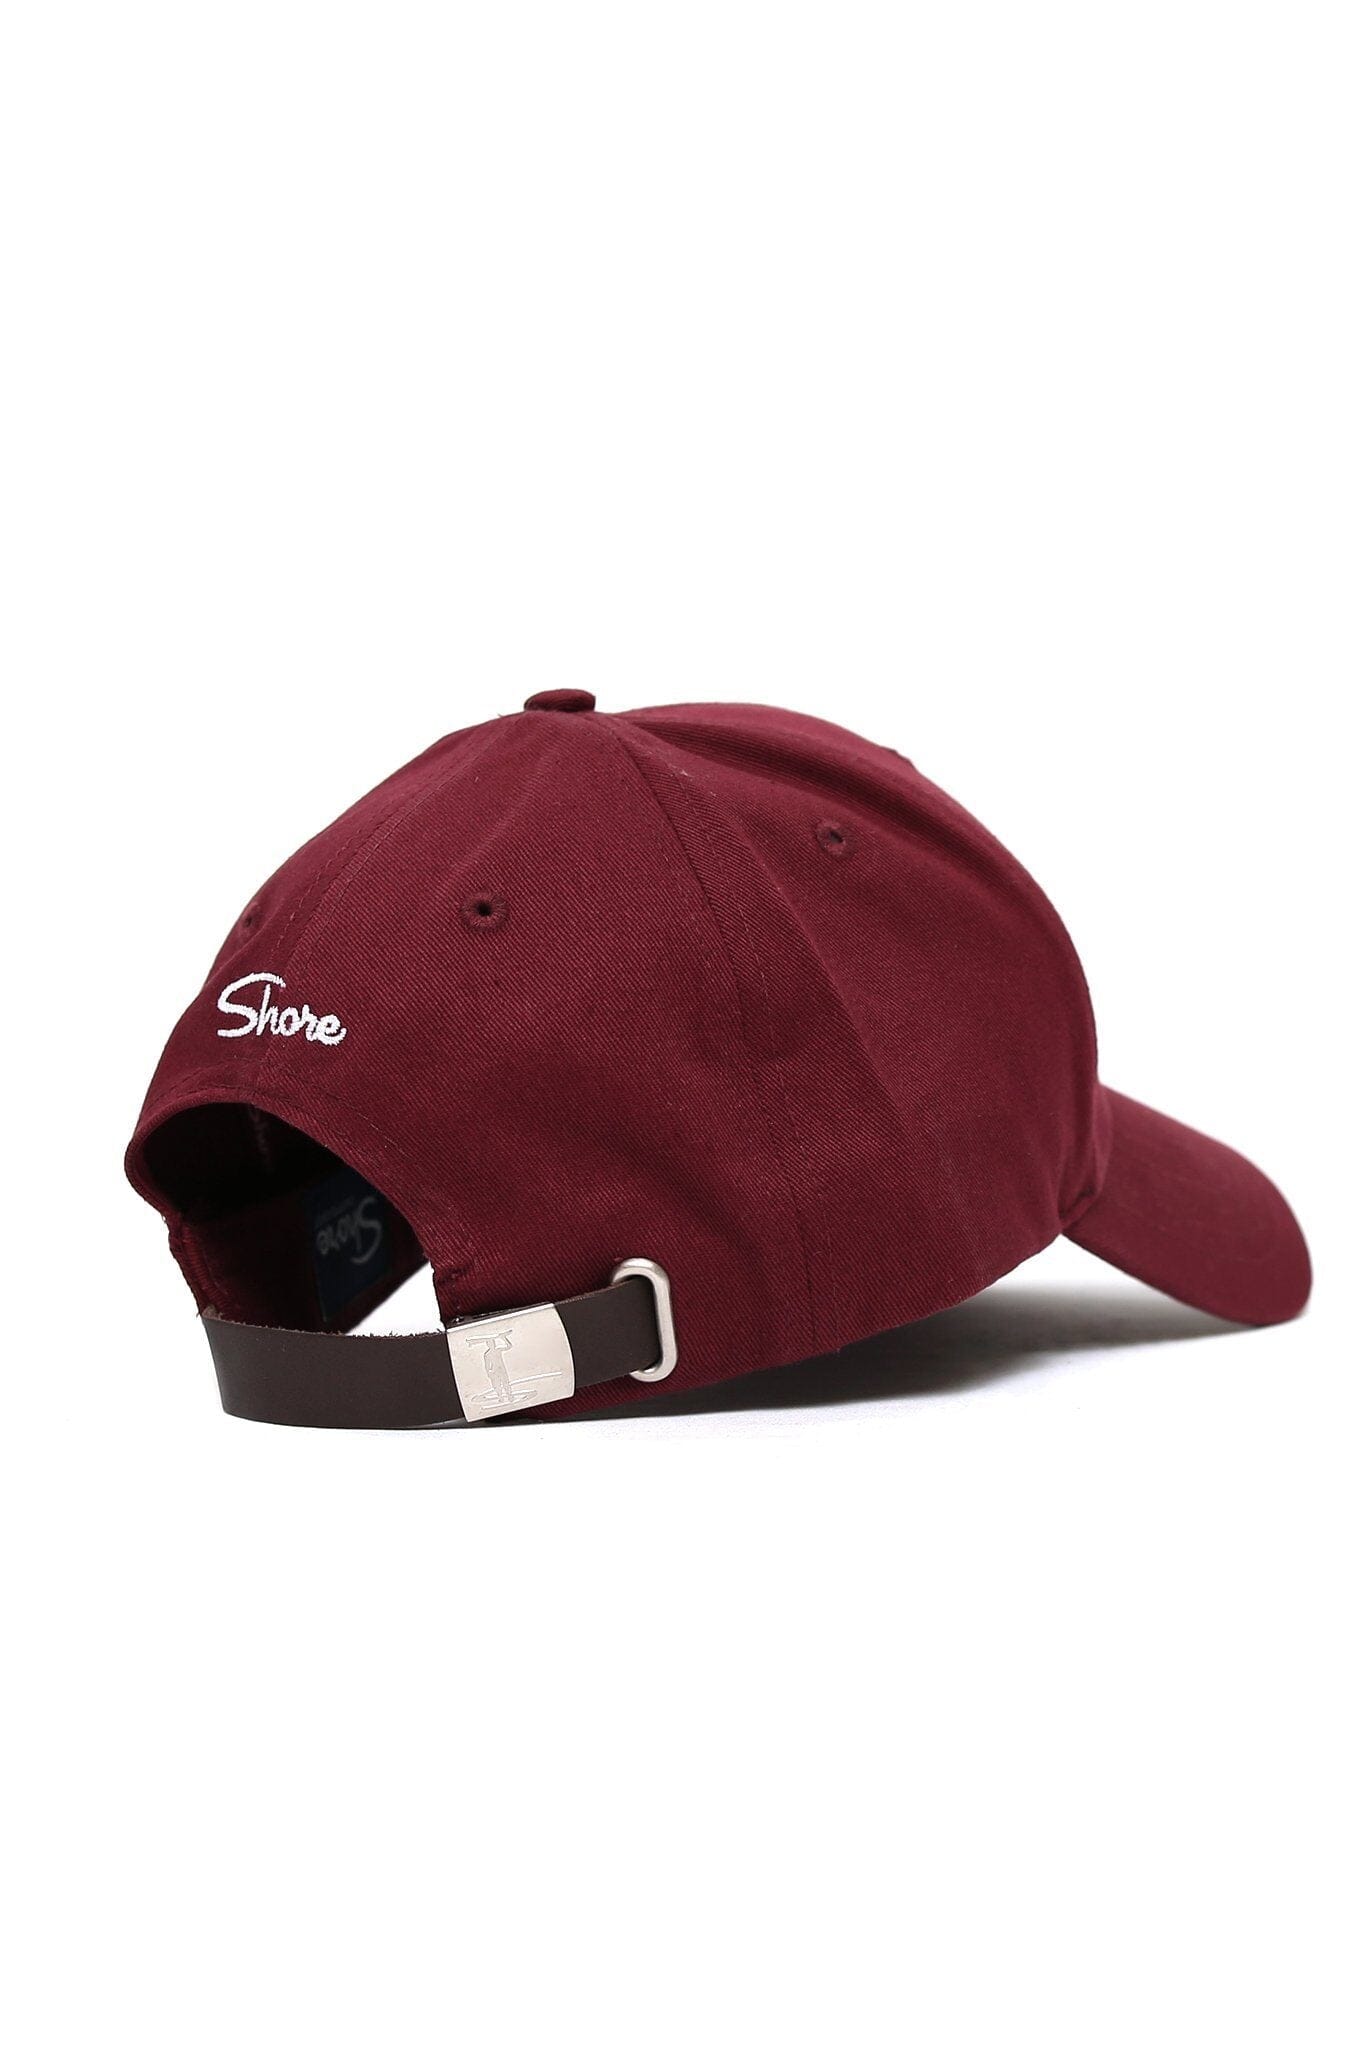 BORN BY WATER WAVES CAP